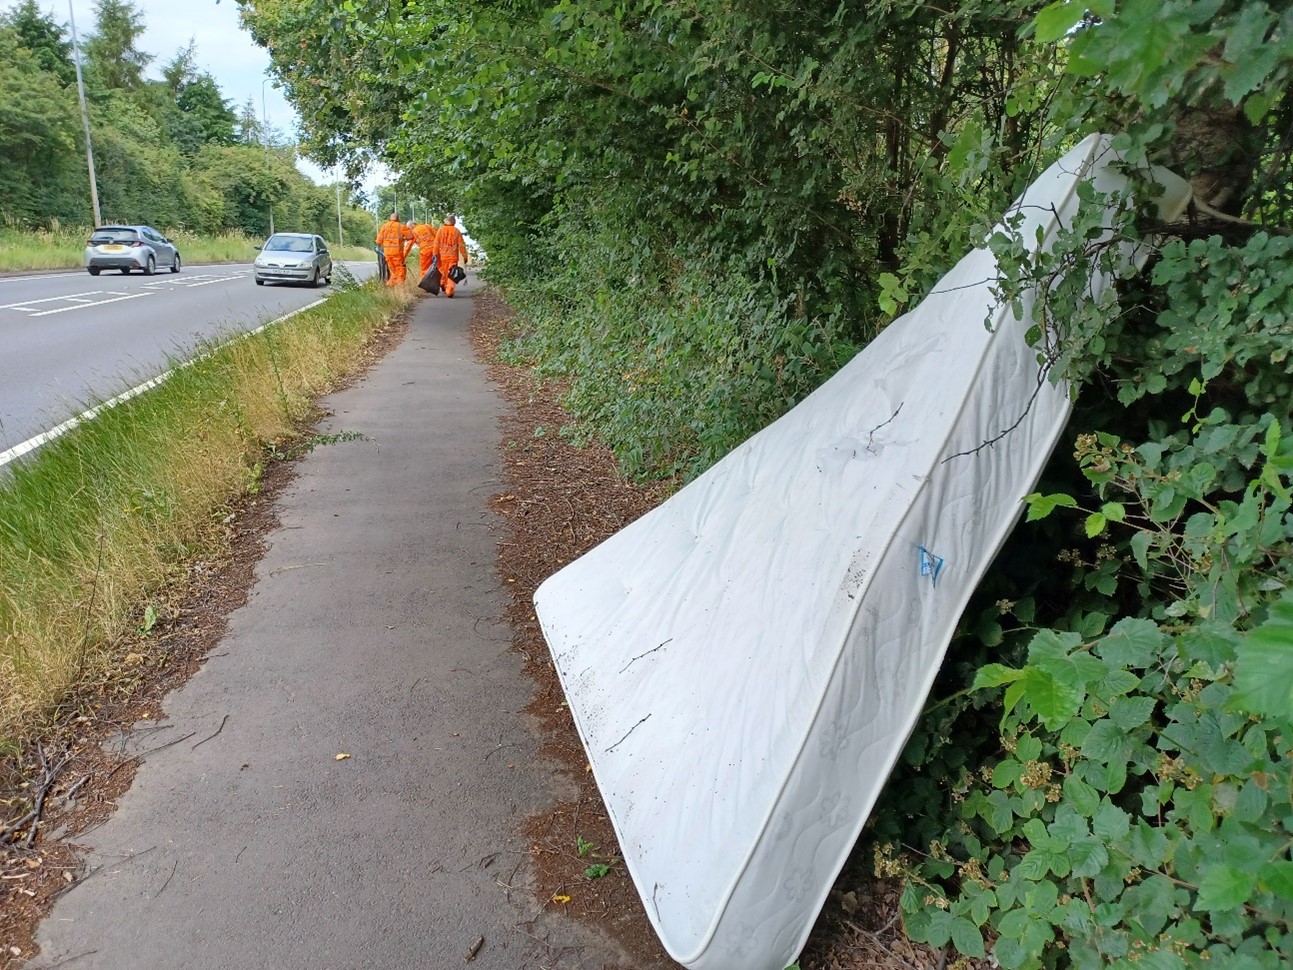 The large double mattress found dumped on the roadside by the A5